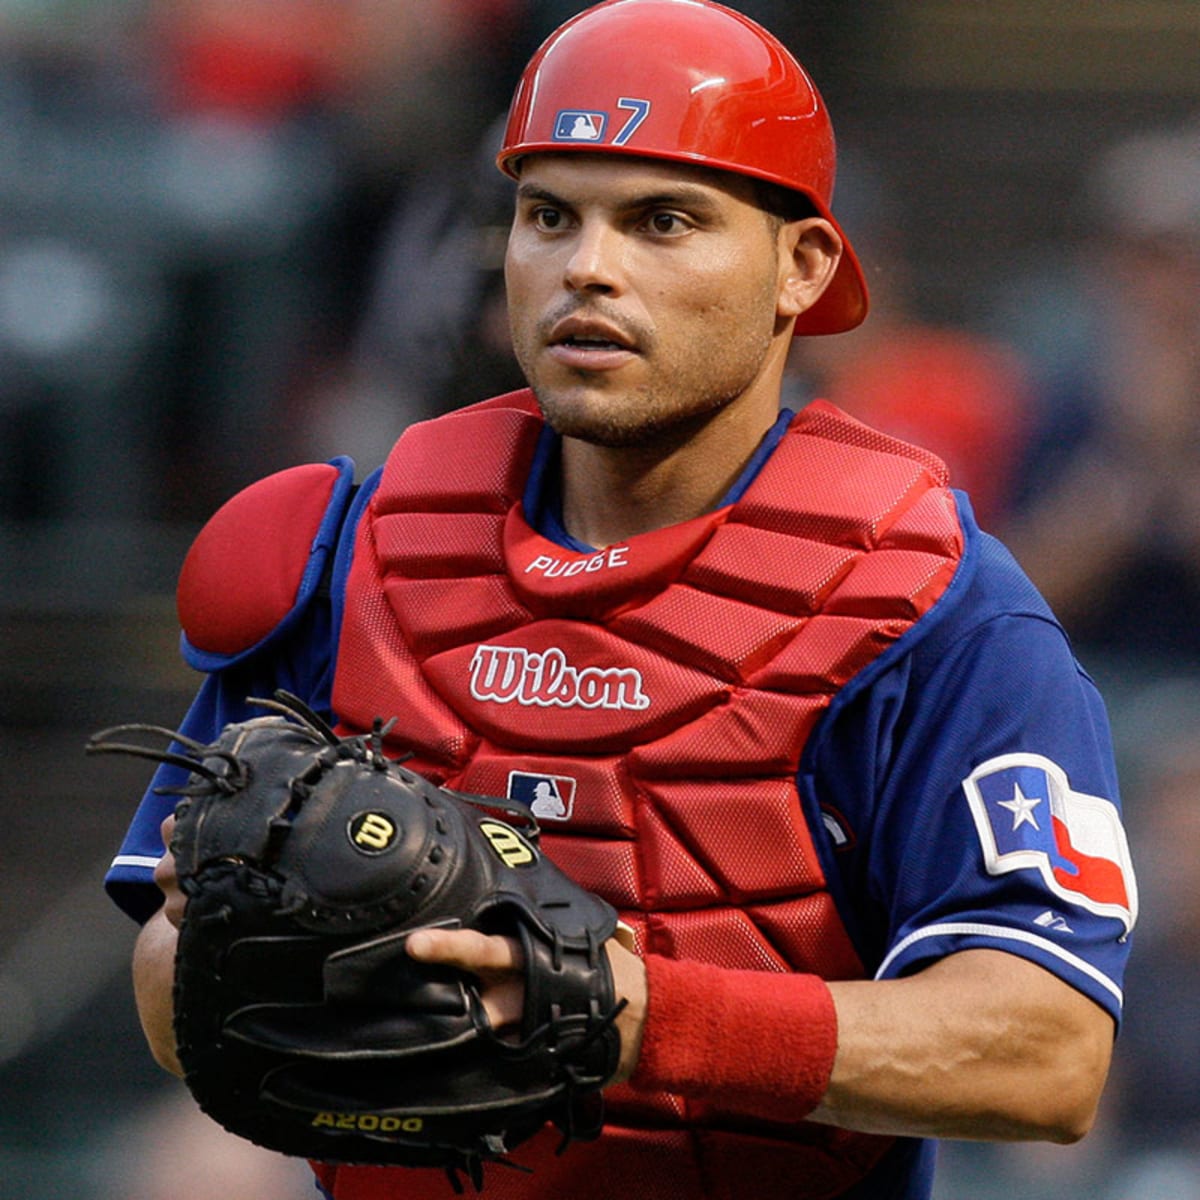 The Astros sign catcher Ivan “Pudge” Rodriguez to a one-year deal